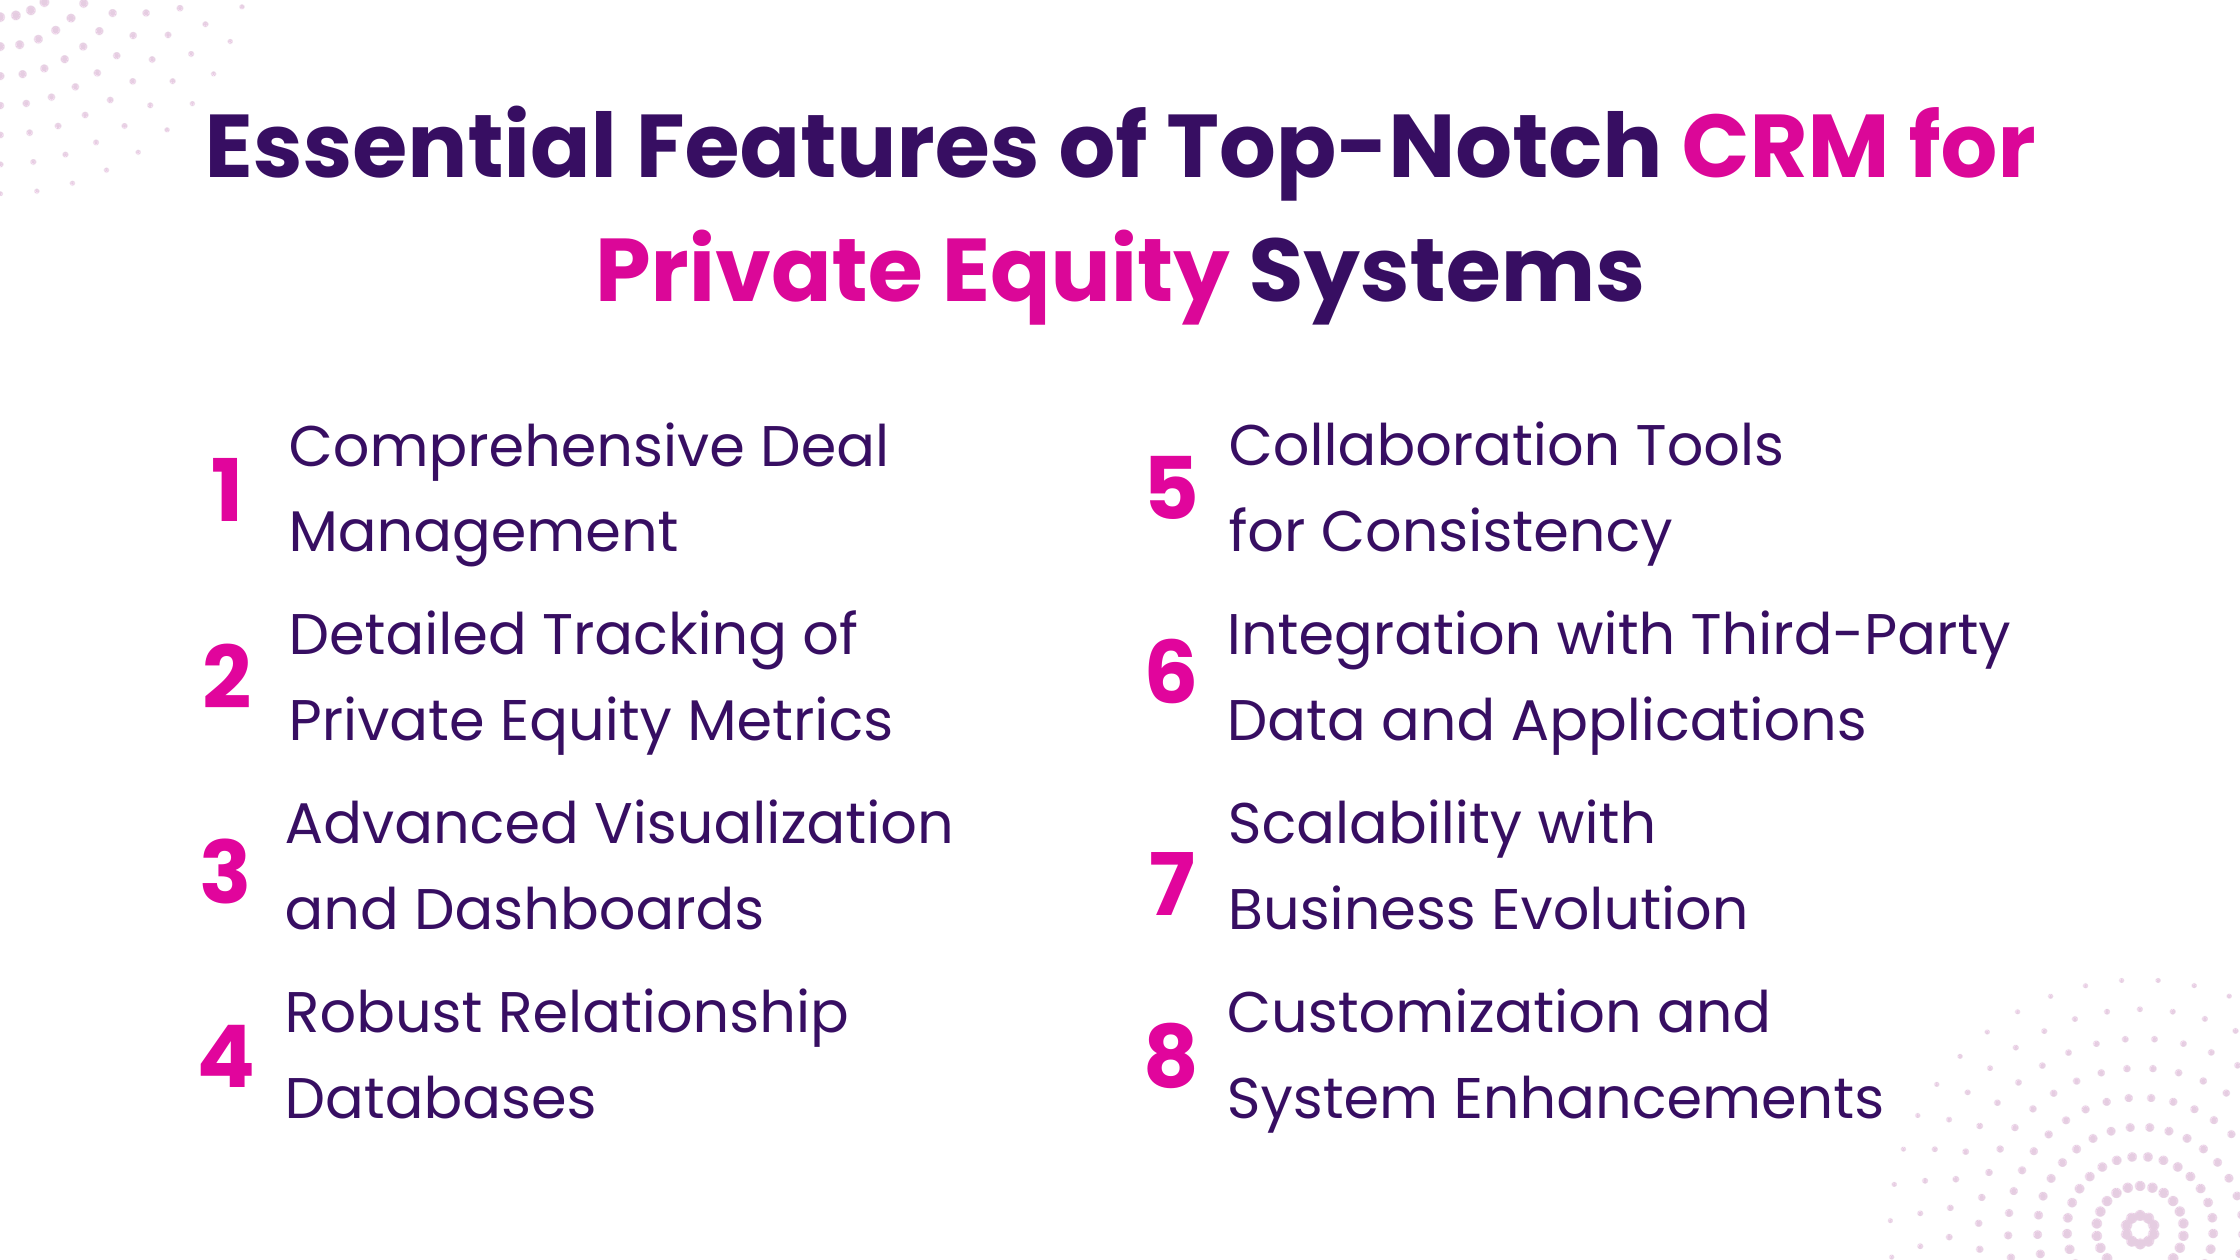 Essential Features of Top-Notch CRM for Private Equity Systems